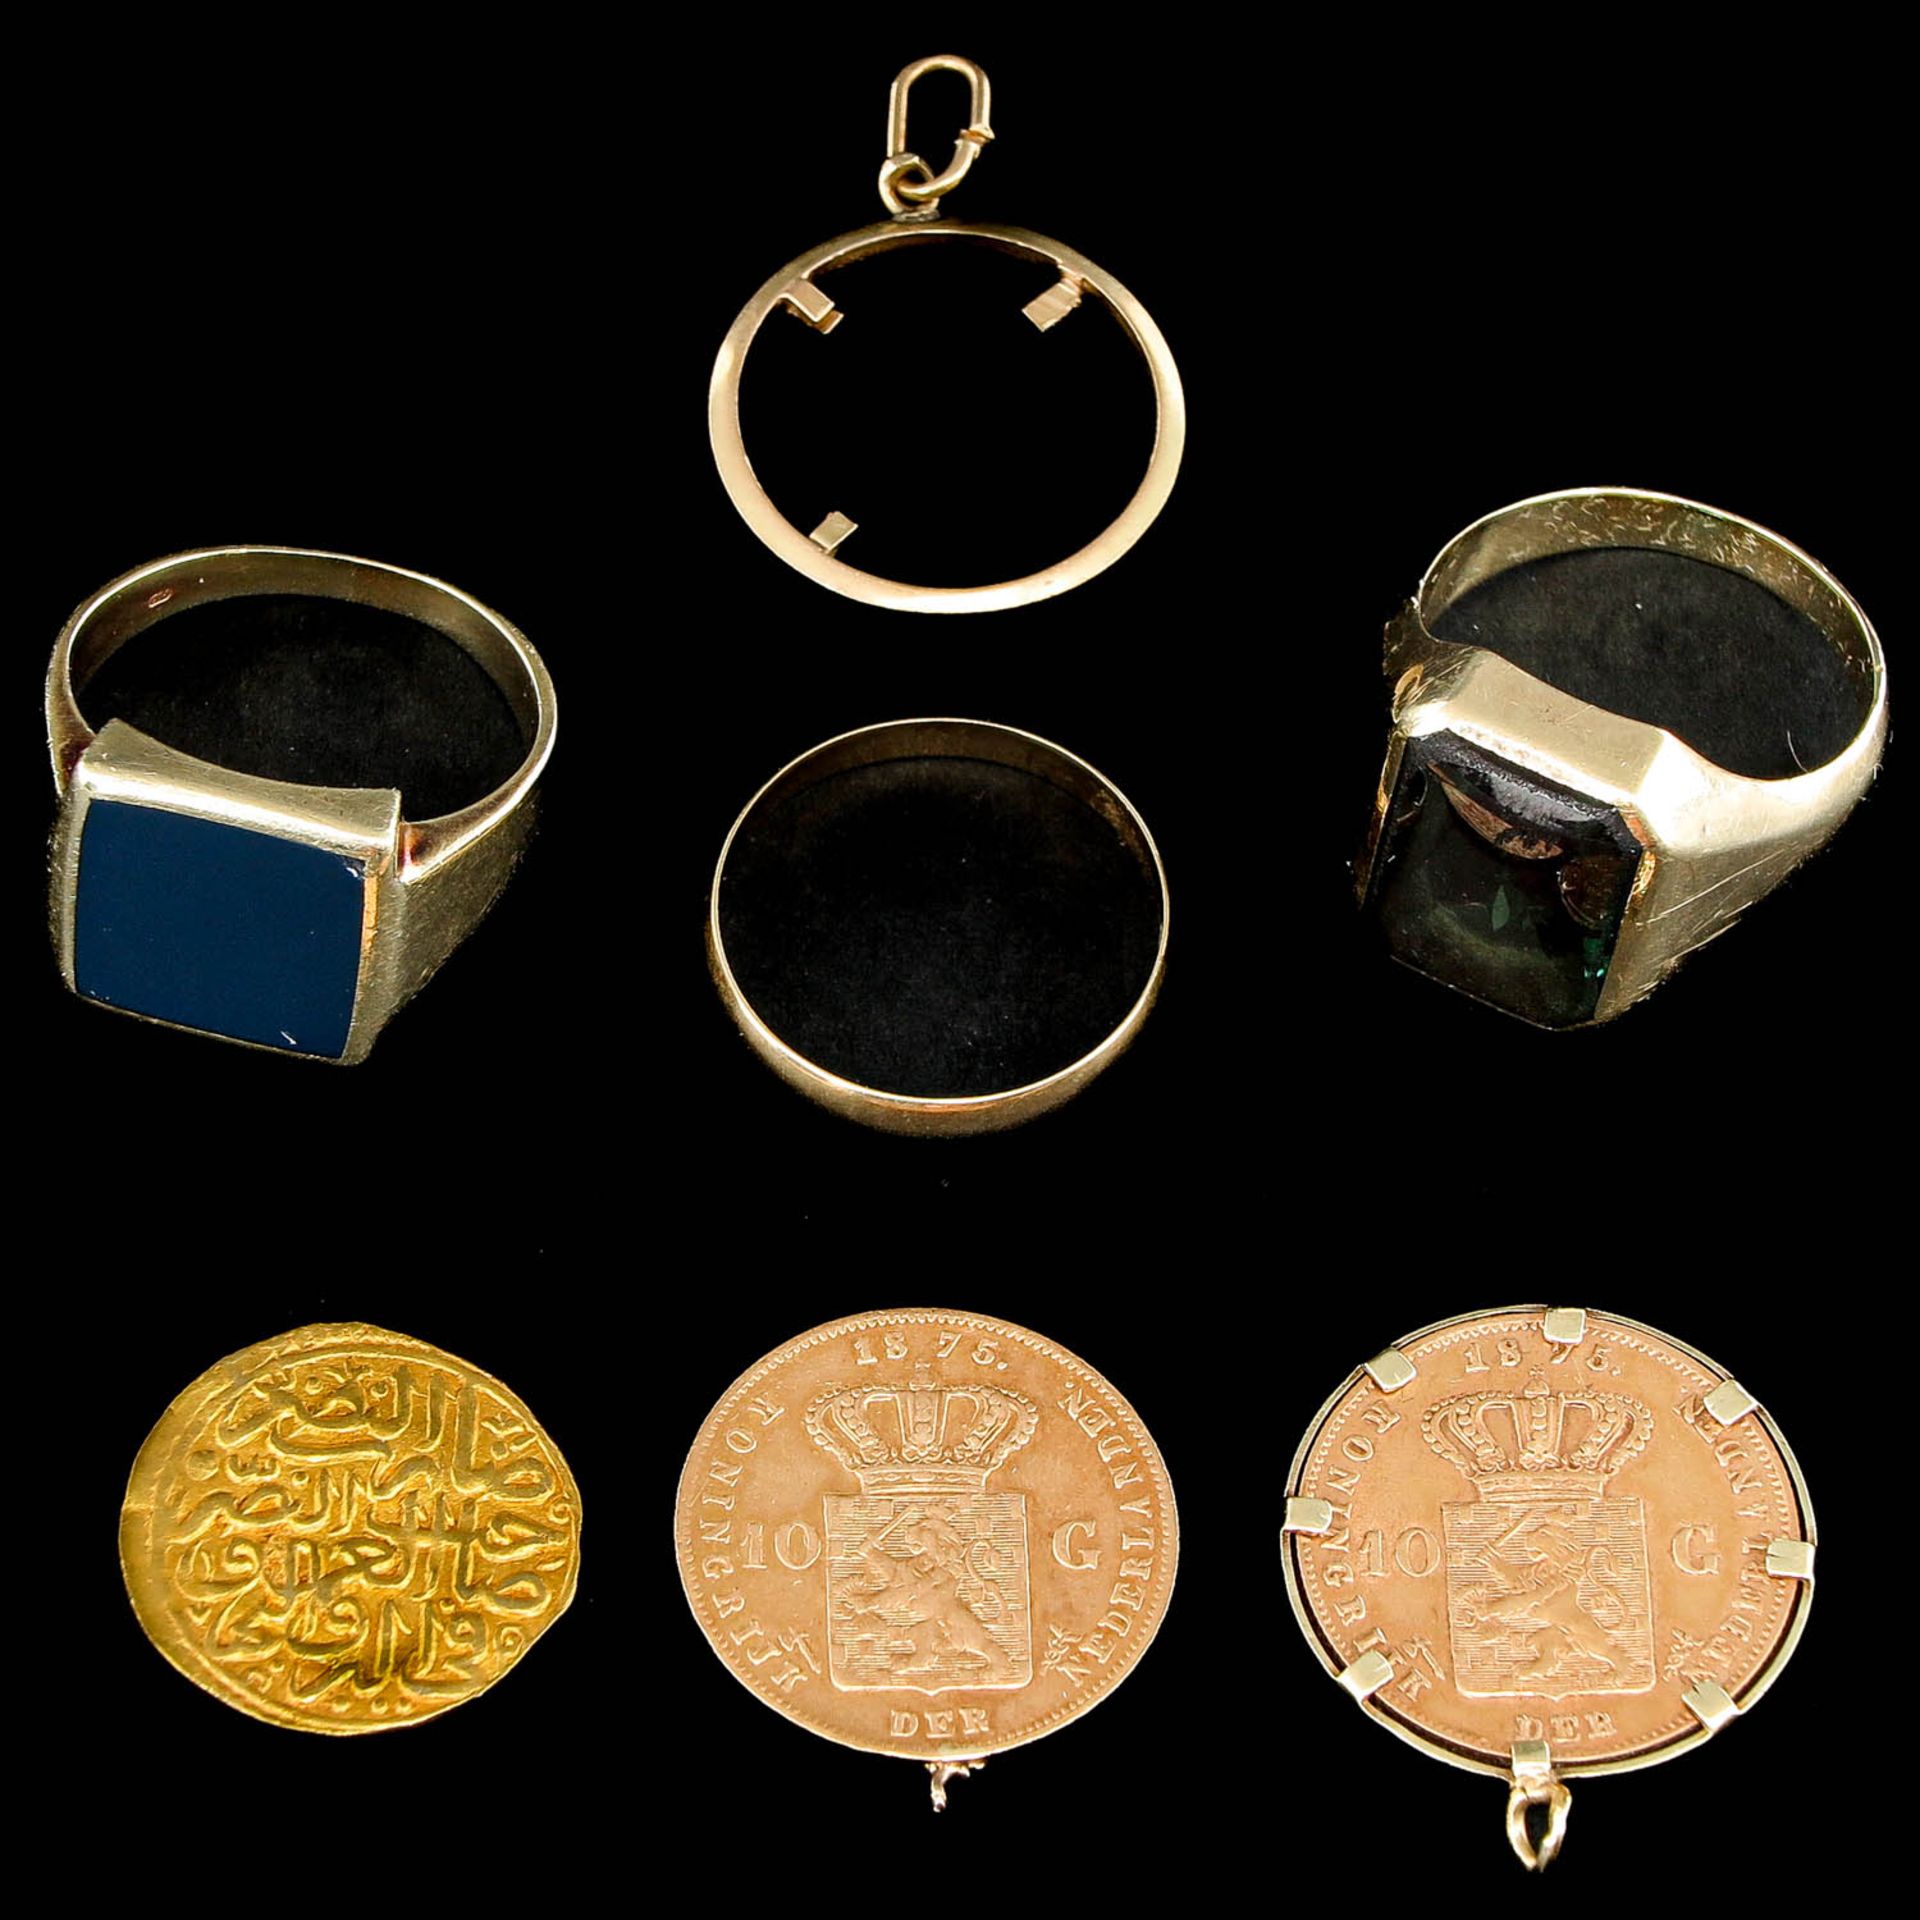 A Collection of Jewelry and Coins